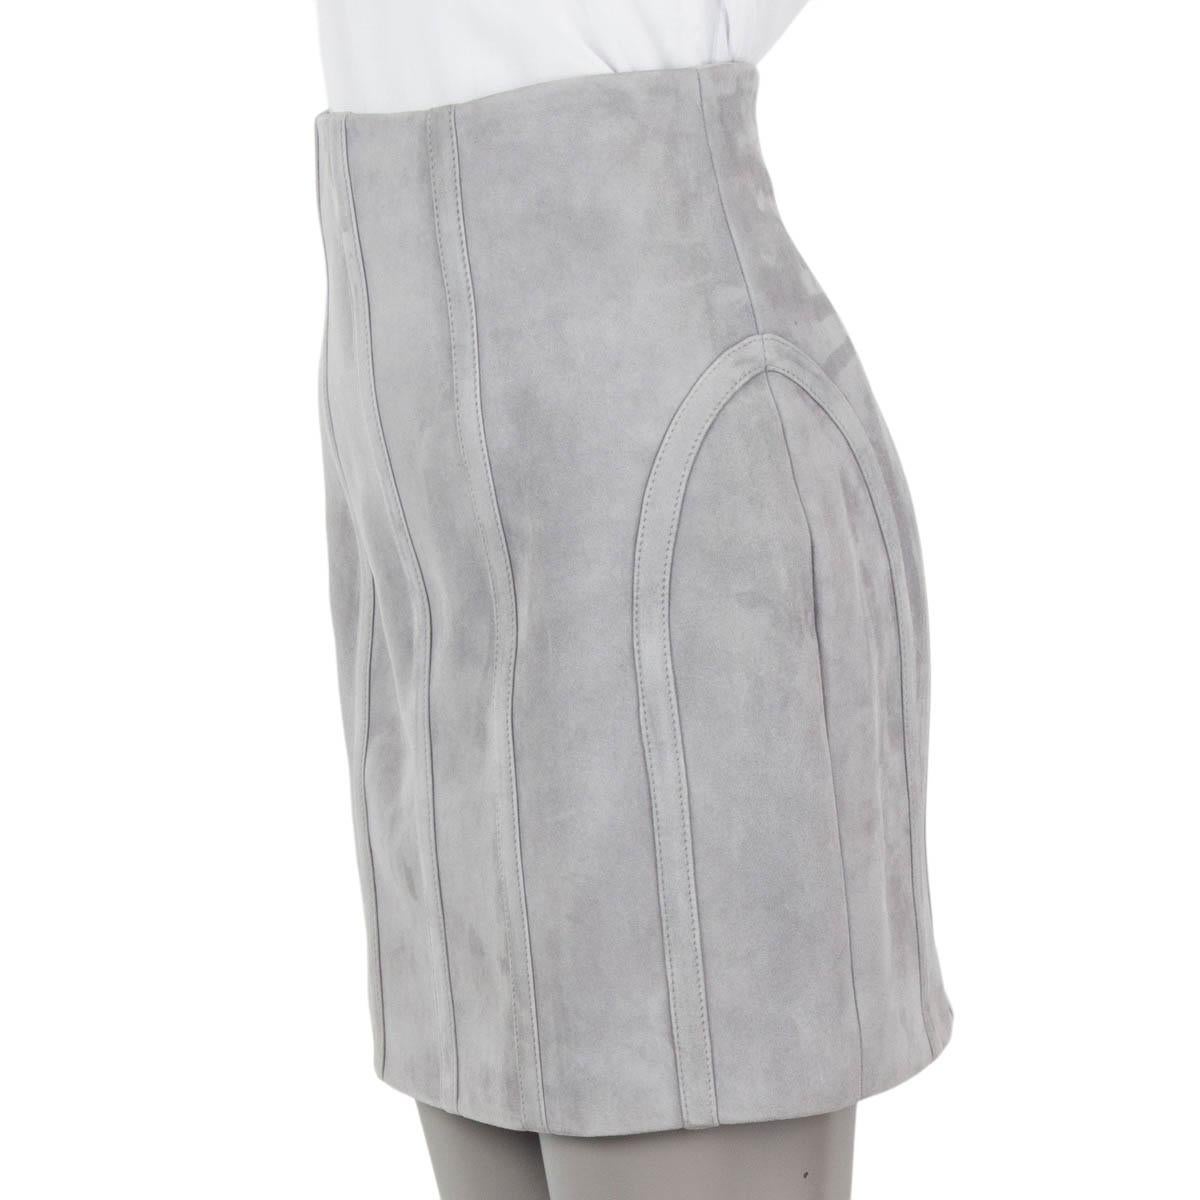 BALMAIN light grey suede 2016 VERTICAL SEAMS MINI Skirt 36 XS In Excellent Condition For Sale In Zürich, CH